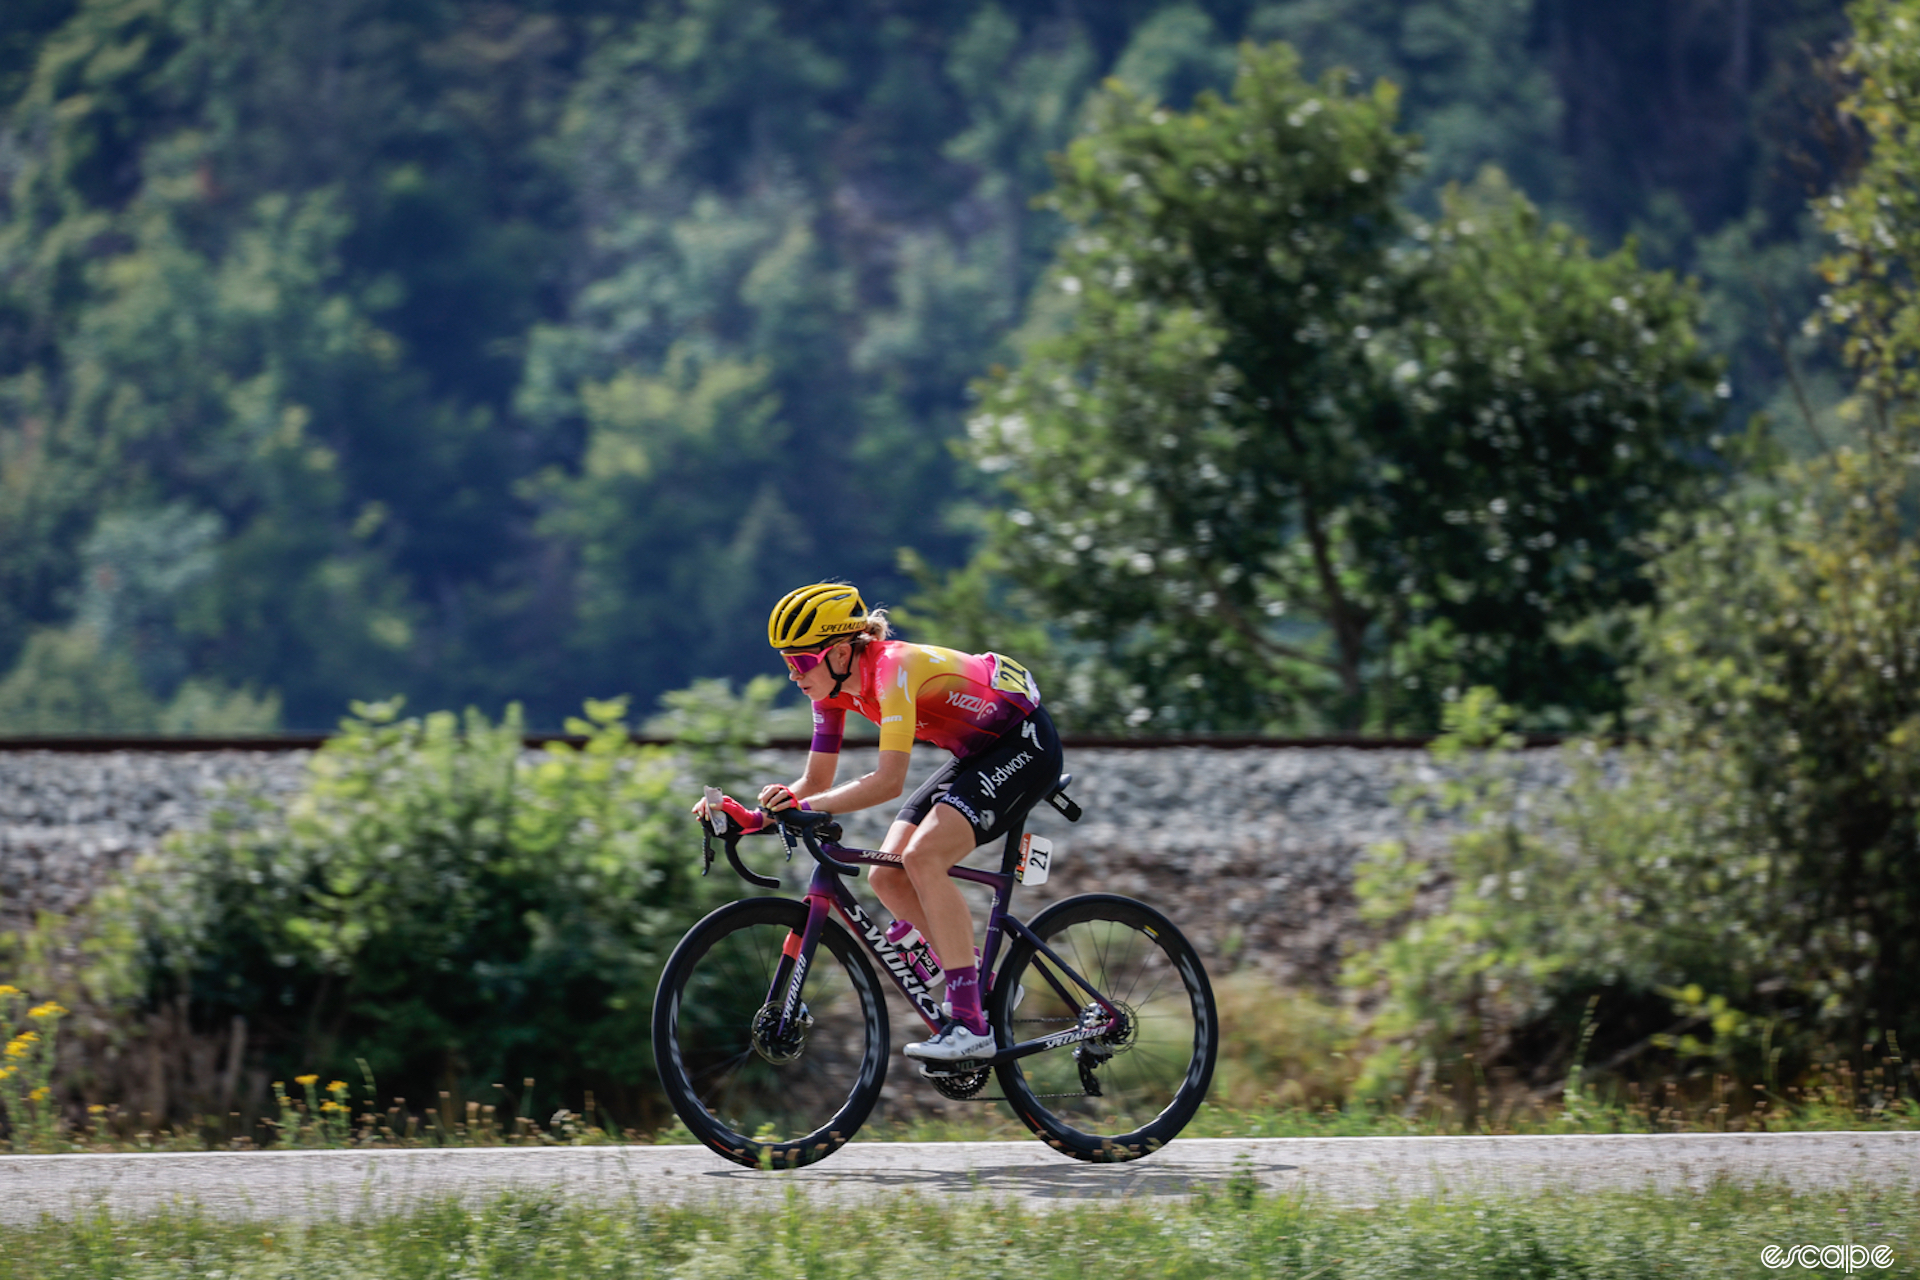 Demi Vollering rides on stage 7 of the Tour de France Femmes. She's alone, with no other racers in the picture, as she rides past a lake.